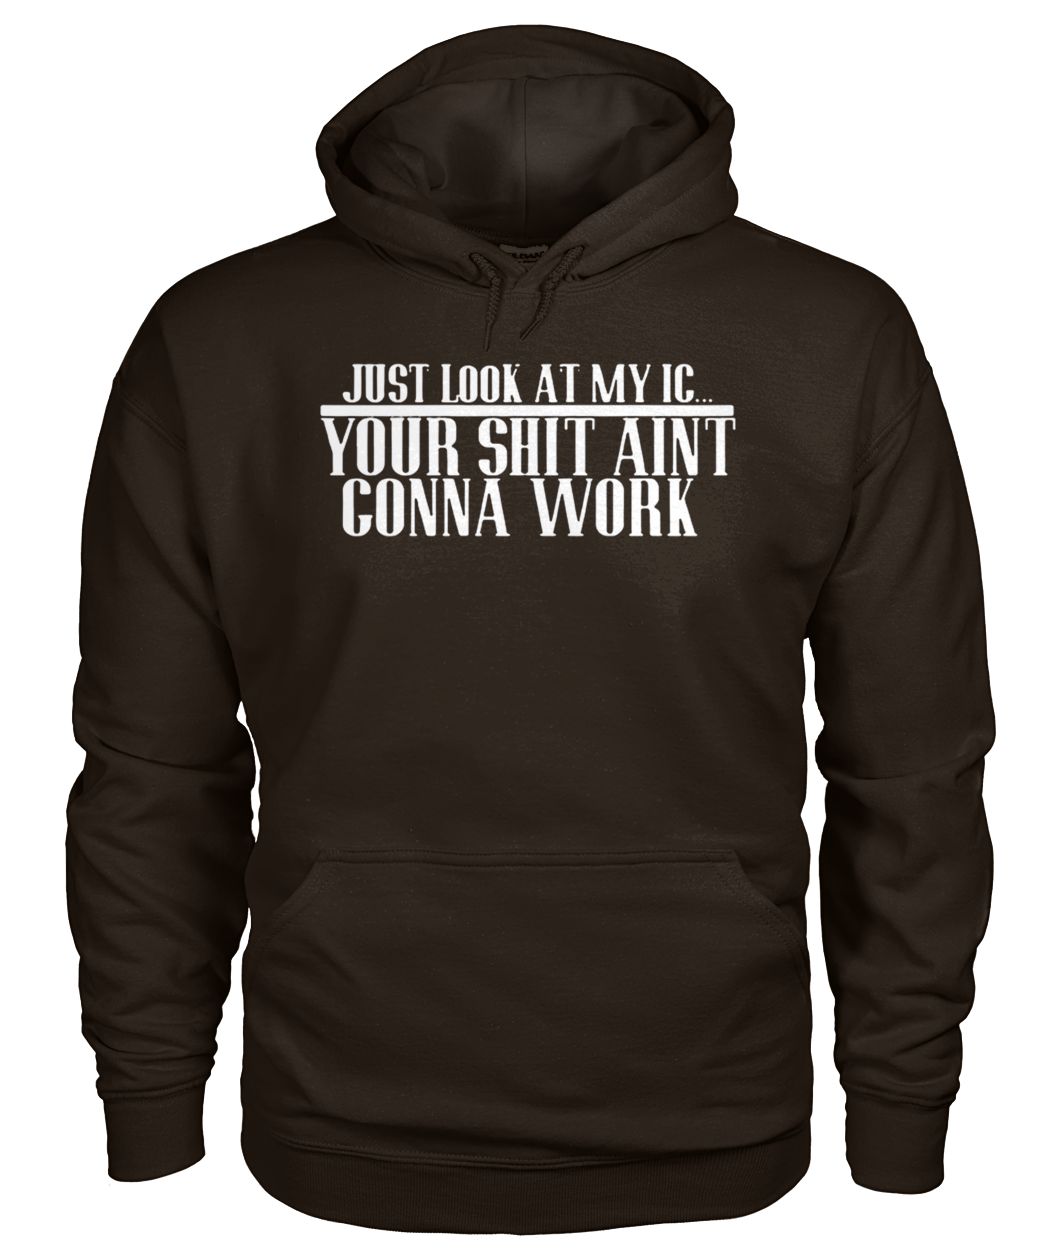 Just look at my IC your shit ain't gonna work gildan hoodie